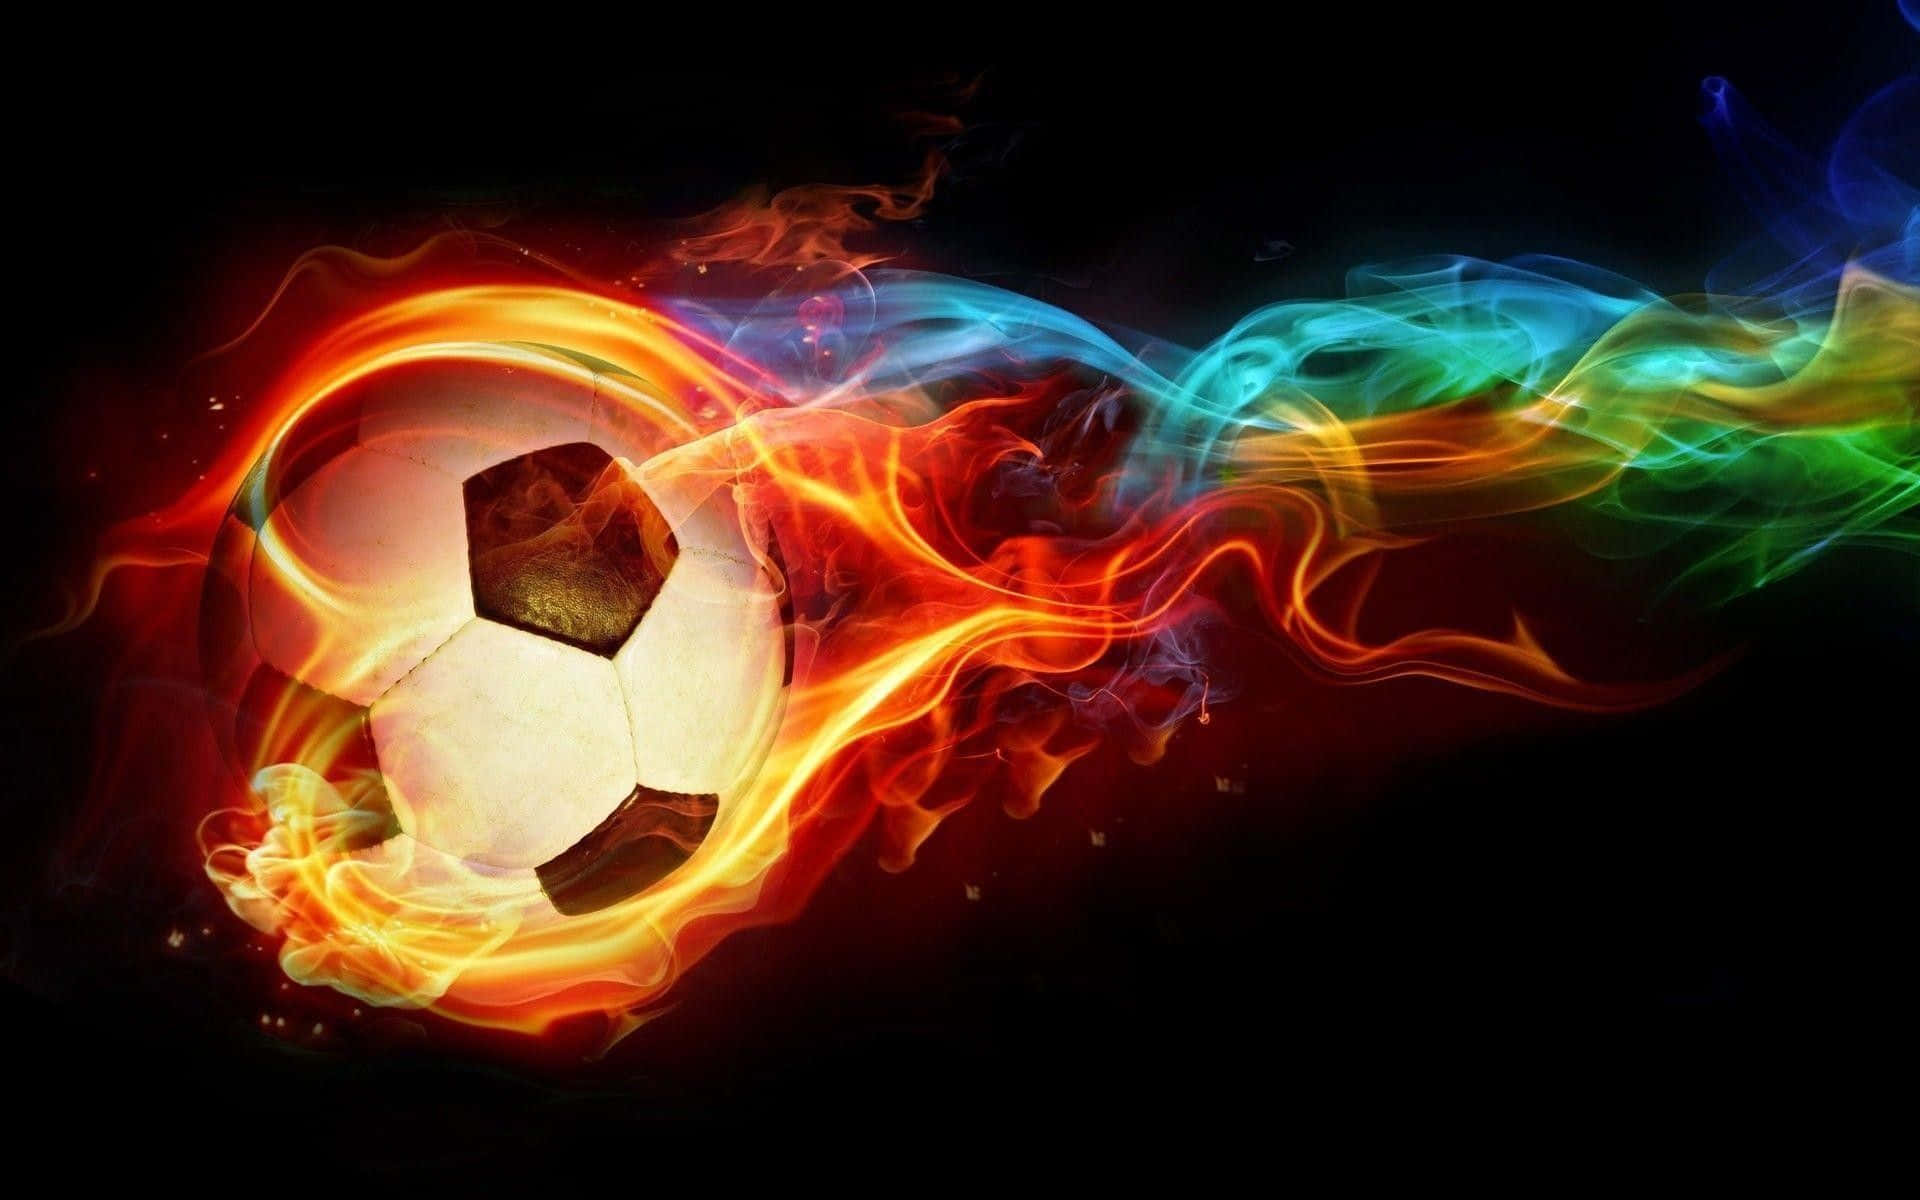 Incredible Kickoff - A close-up of a soccer ball on a professional pitch